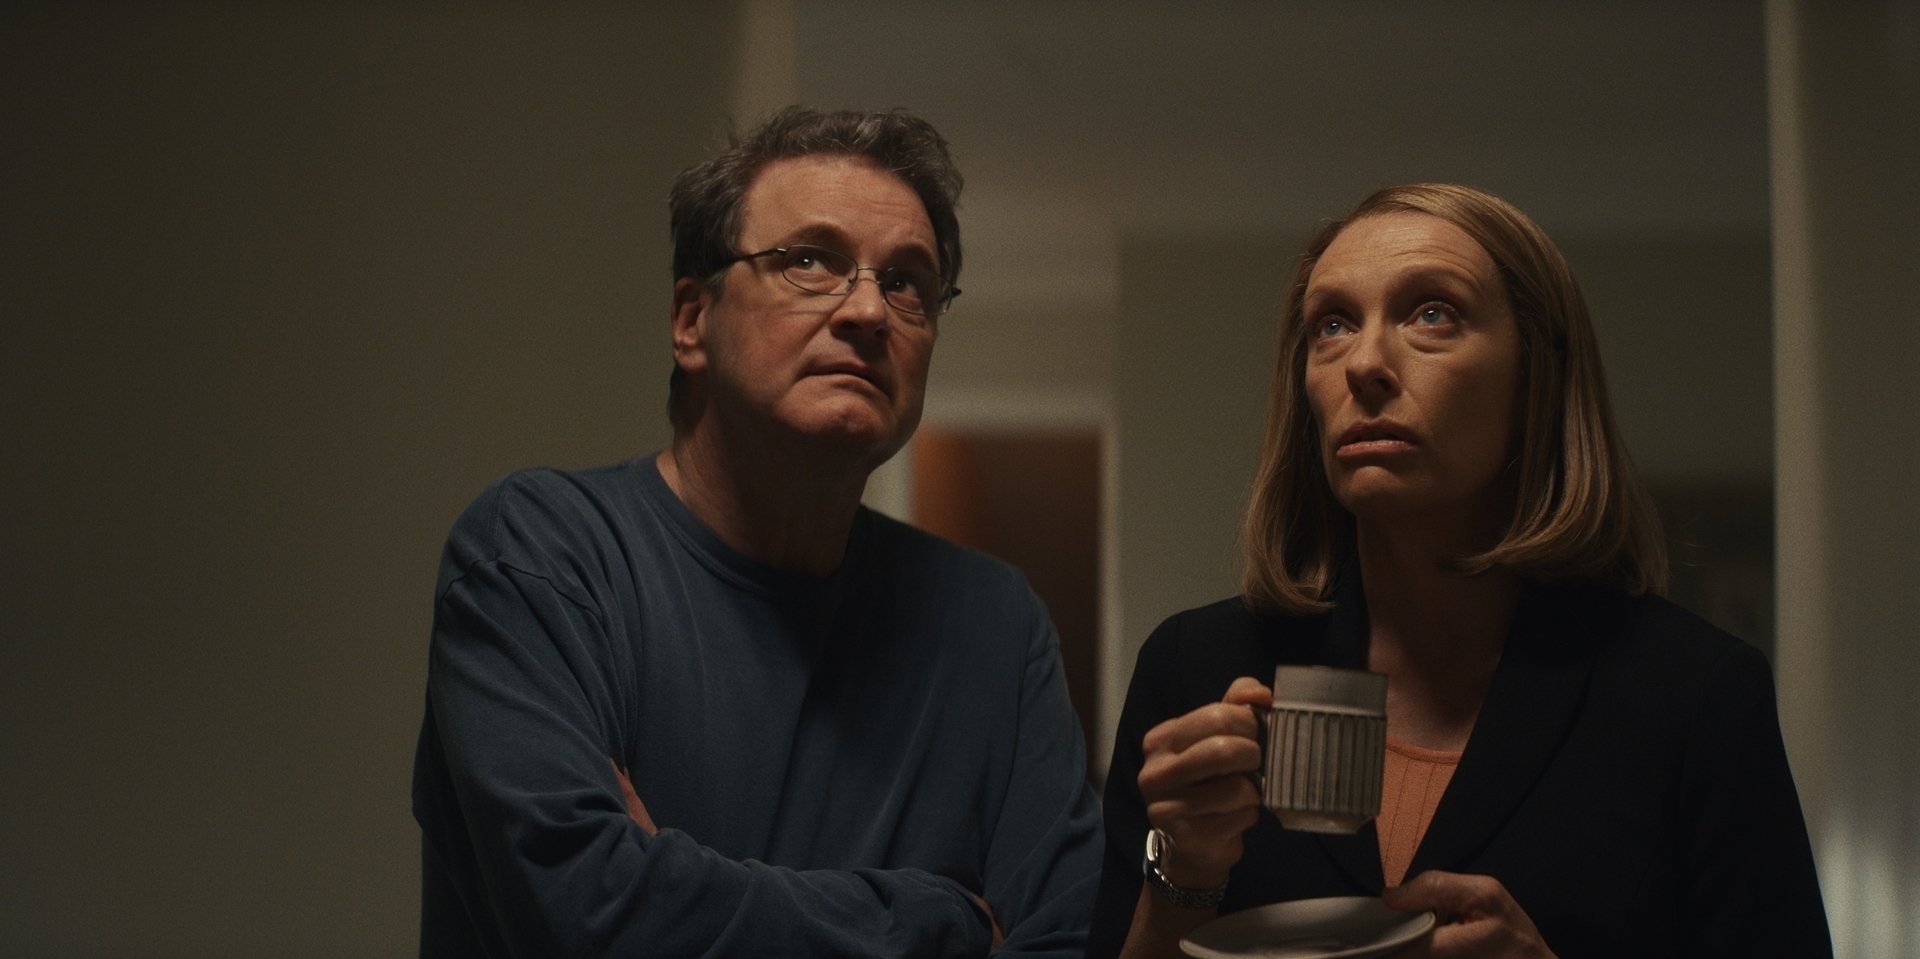 Colin Firth and Toni Collette play Michael and Kathleen Peterson in the HBO Max 